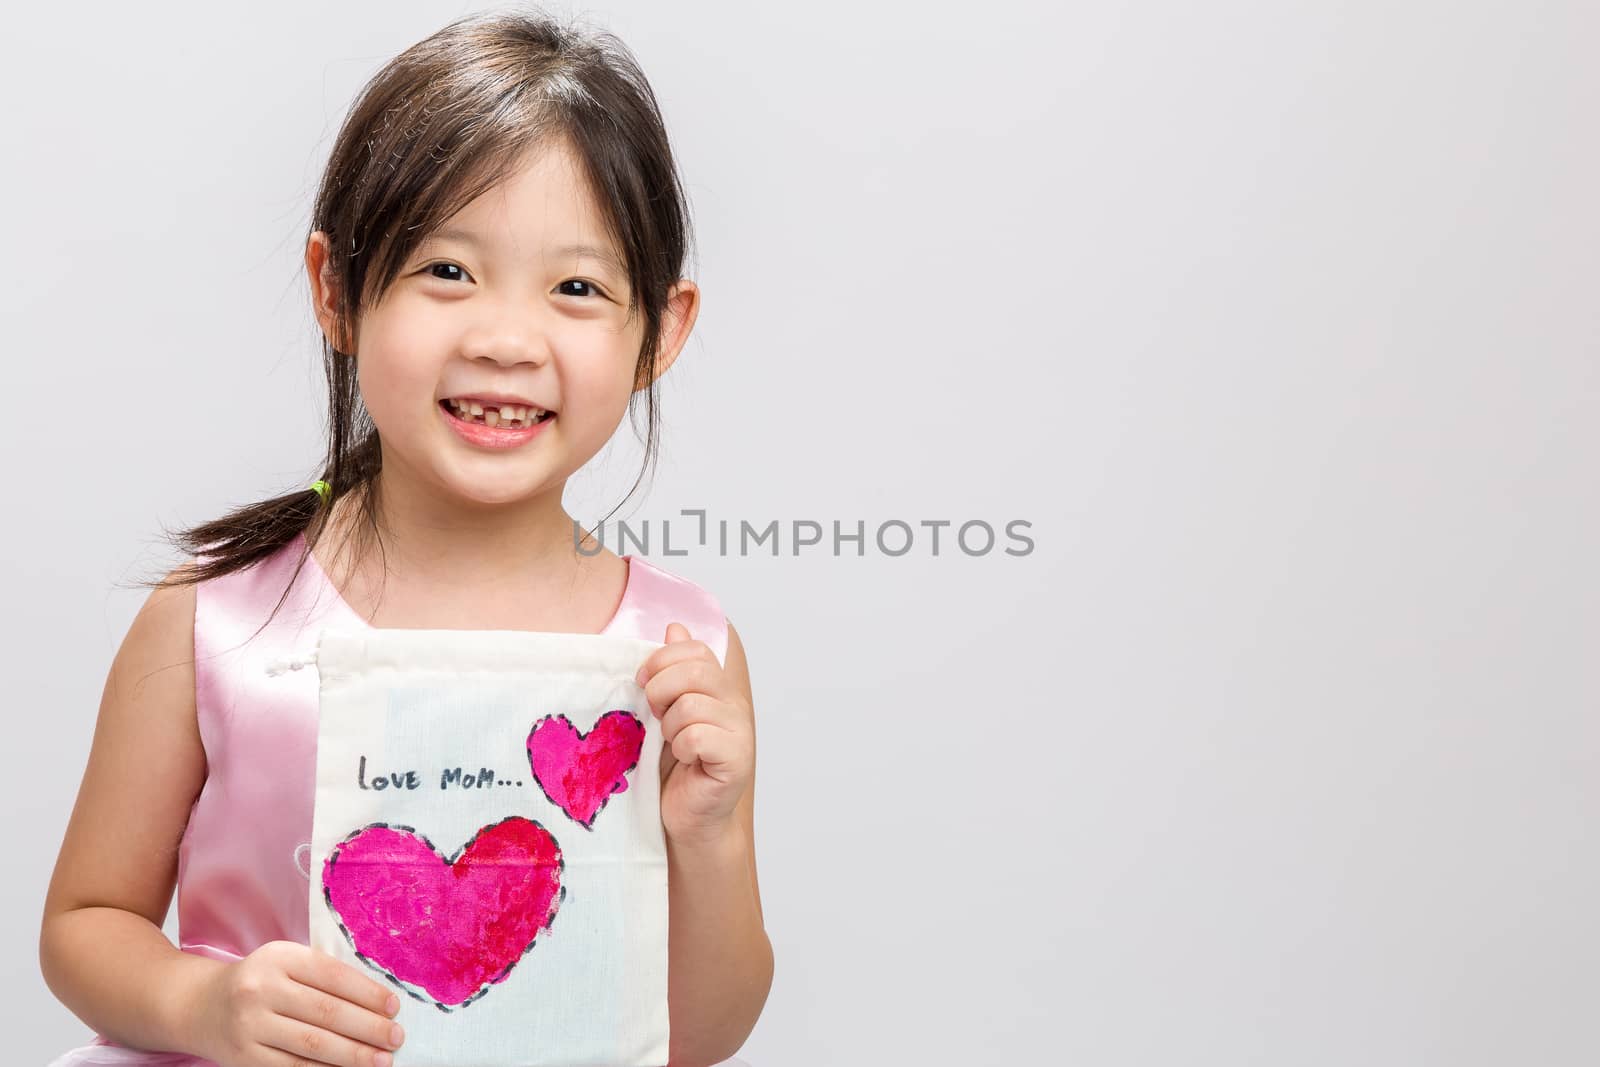 Child with LOVE MOM Message / Child with LOVE MOM Message, Studi by supparsorn